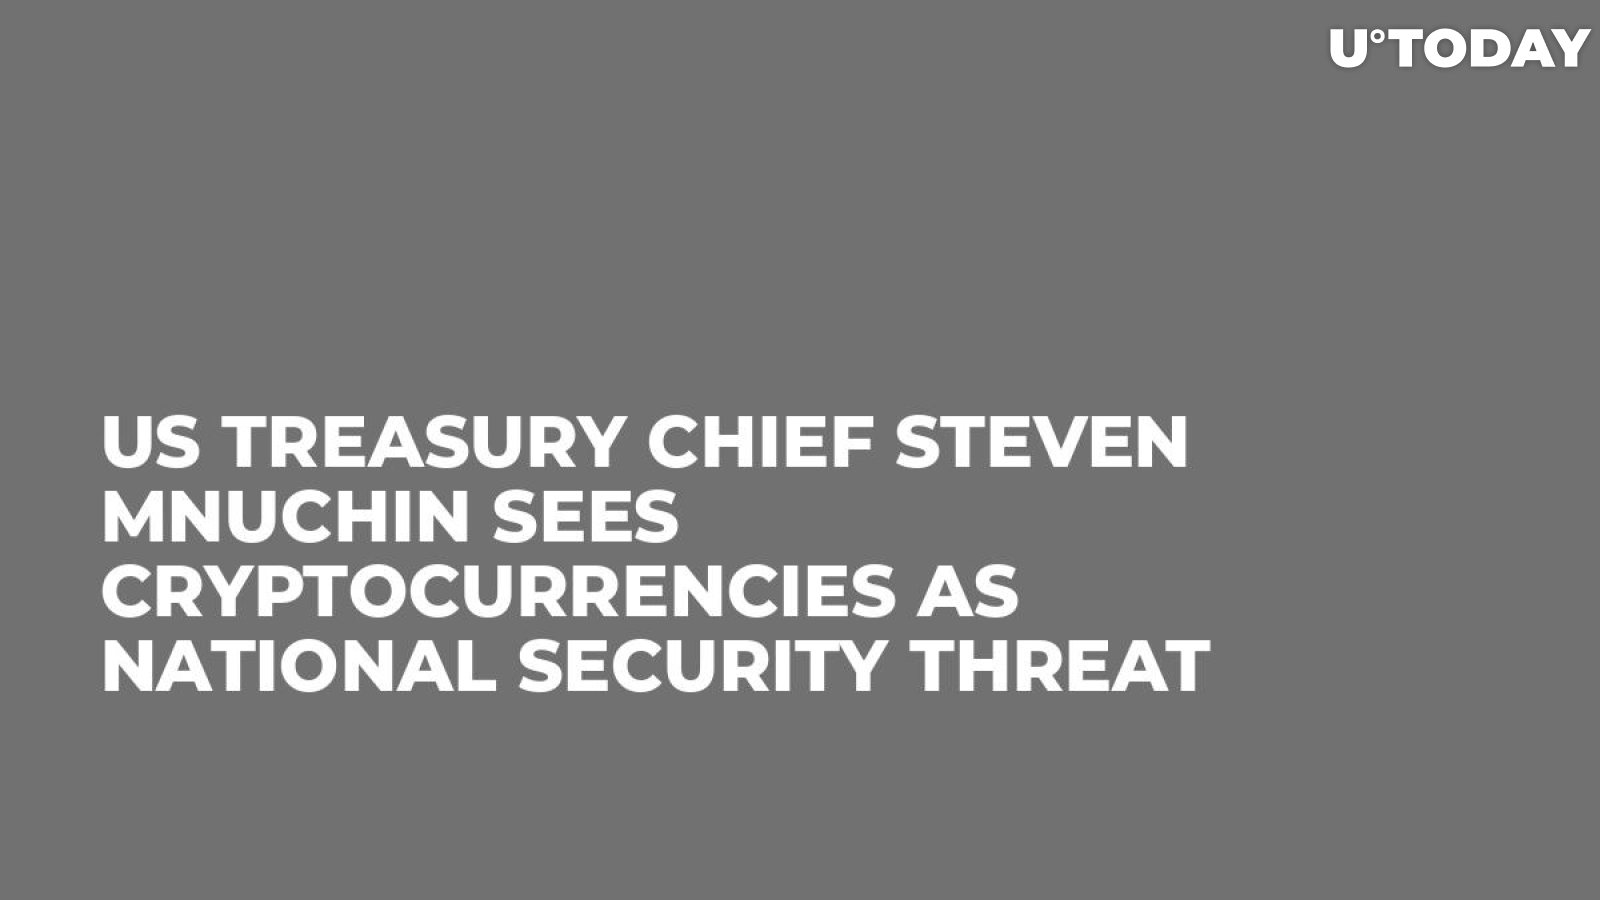 US Treasury Chief Steven Mnuchin Sees Cryptocurrencies as National Security Threat 